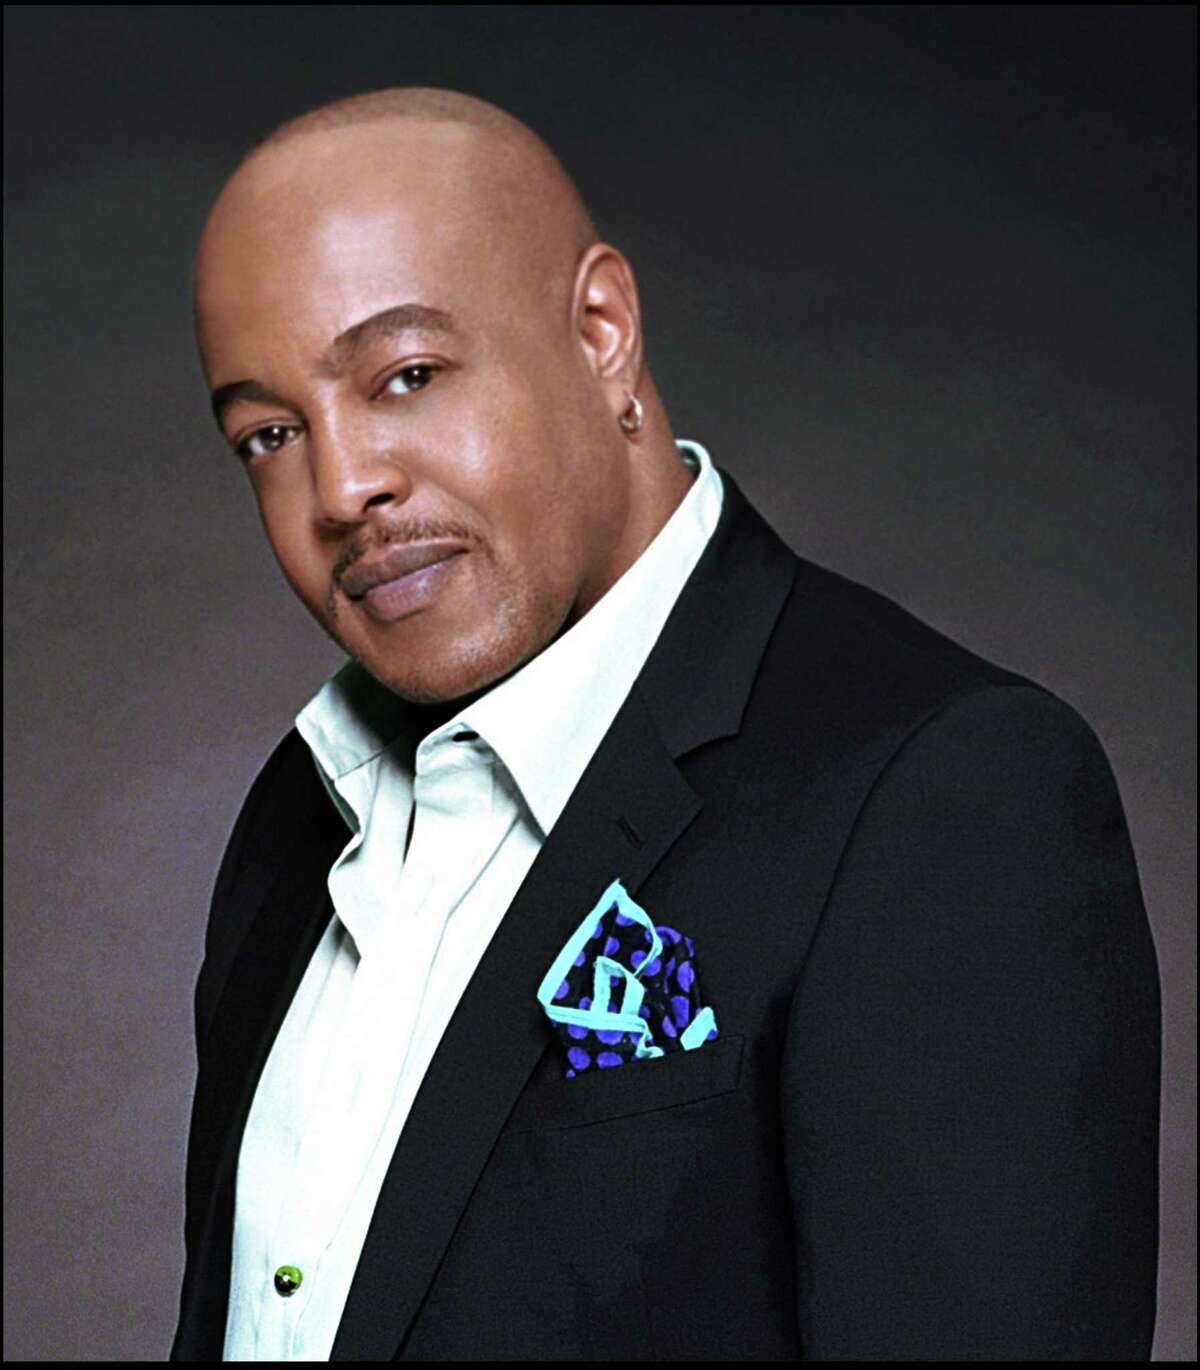 Peabo Bryson: R&B star Peabo Bryson kicks off the Carver Community Cultural Center’s 2018-’19 performance season. The two-time Grammy winner is touring behind his 21st album, “Stand for Love.” He told Billboard the title “isn't just about romantic love or relationship love. It's about all kinds of love in every kind of relationship. It's about what we do with our time here on this good earth.” 8 p.m. Saturday. Jo Long Theatre, Carver Community Cultural Center, 226 N. Hackberry. $45 at the Carver box office, by calling 210-207-2234 and at ticketmaster.com. — Deborah Martin